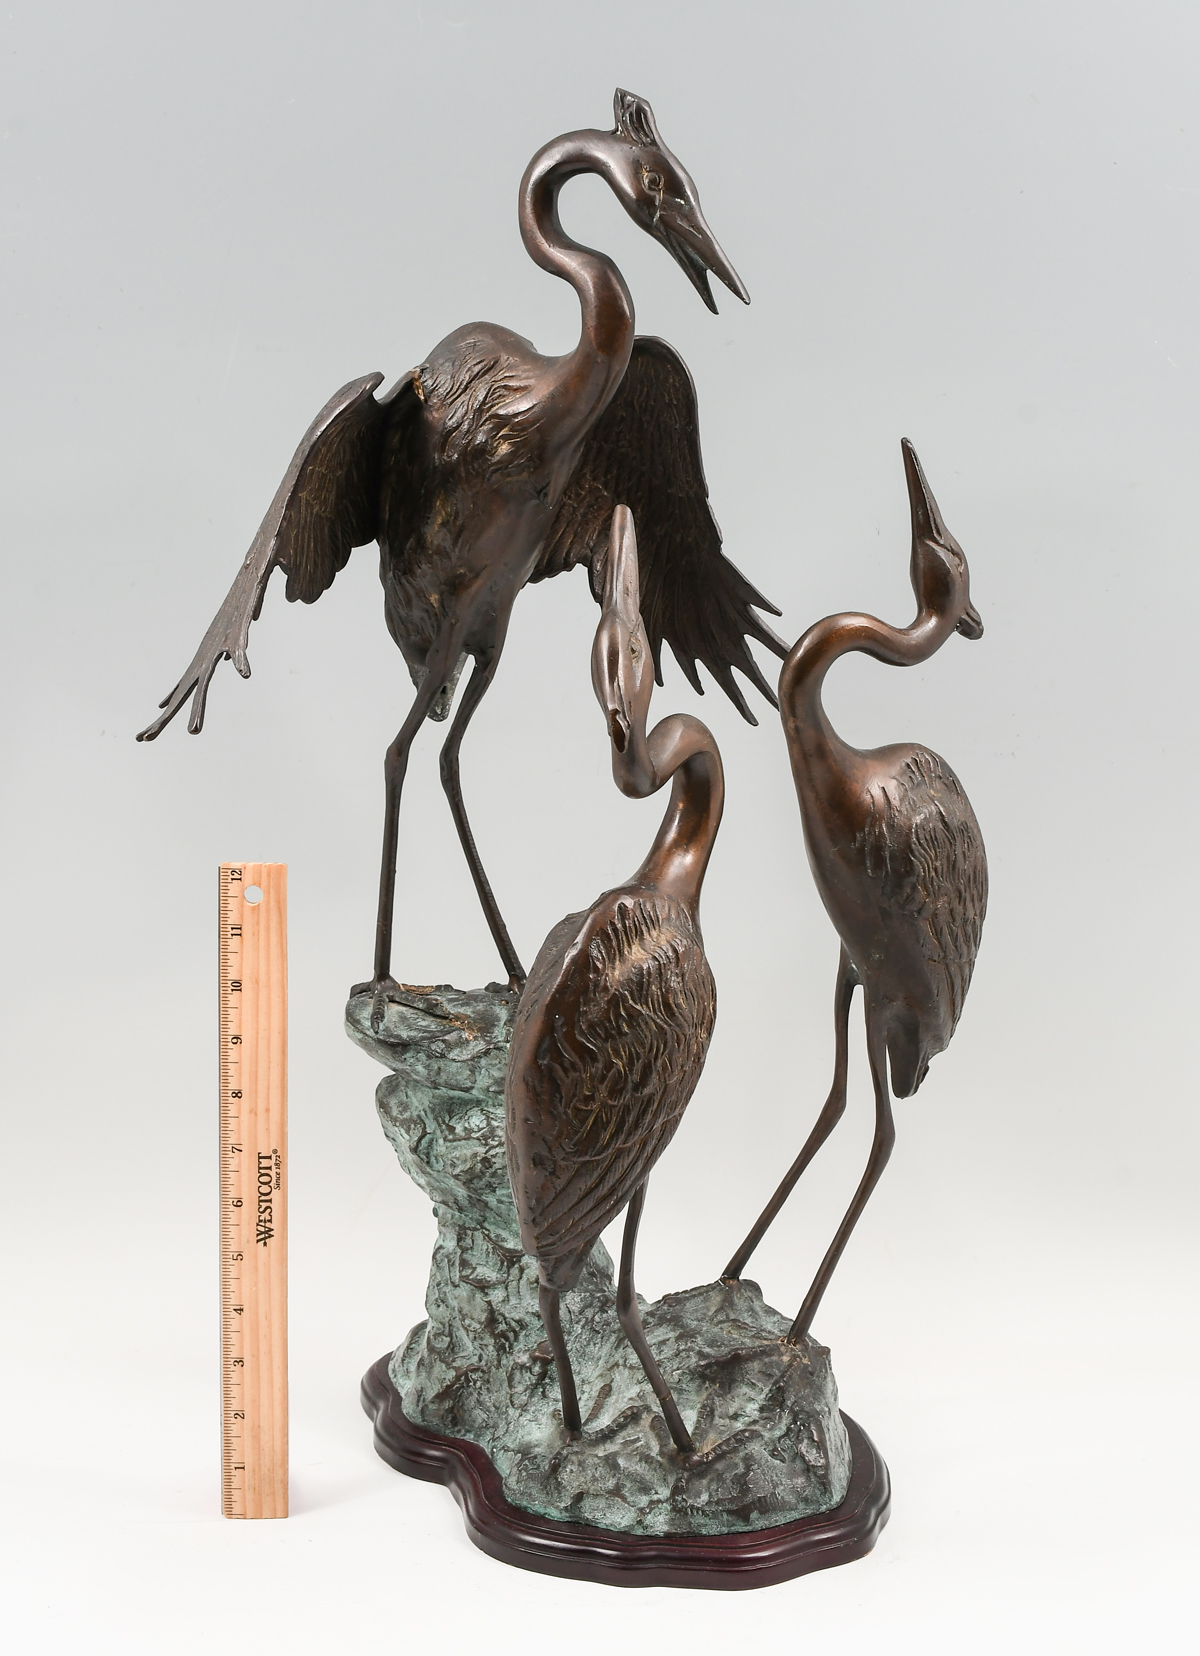 LARGE BRONZE HERONS STATUE: Crafted